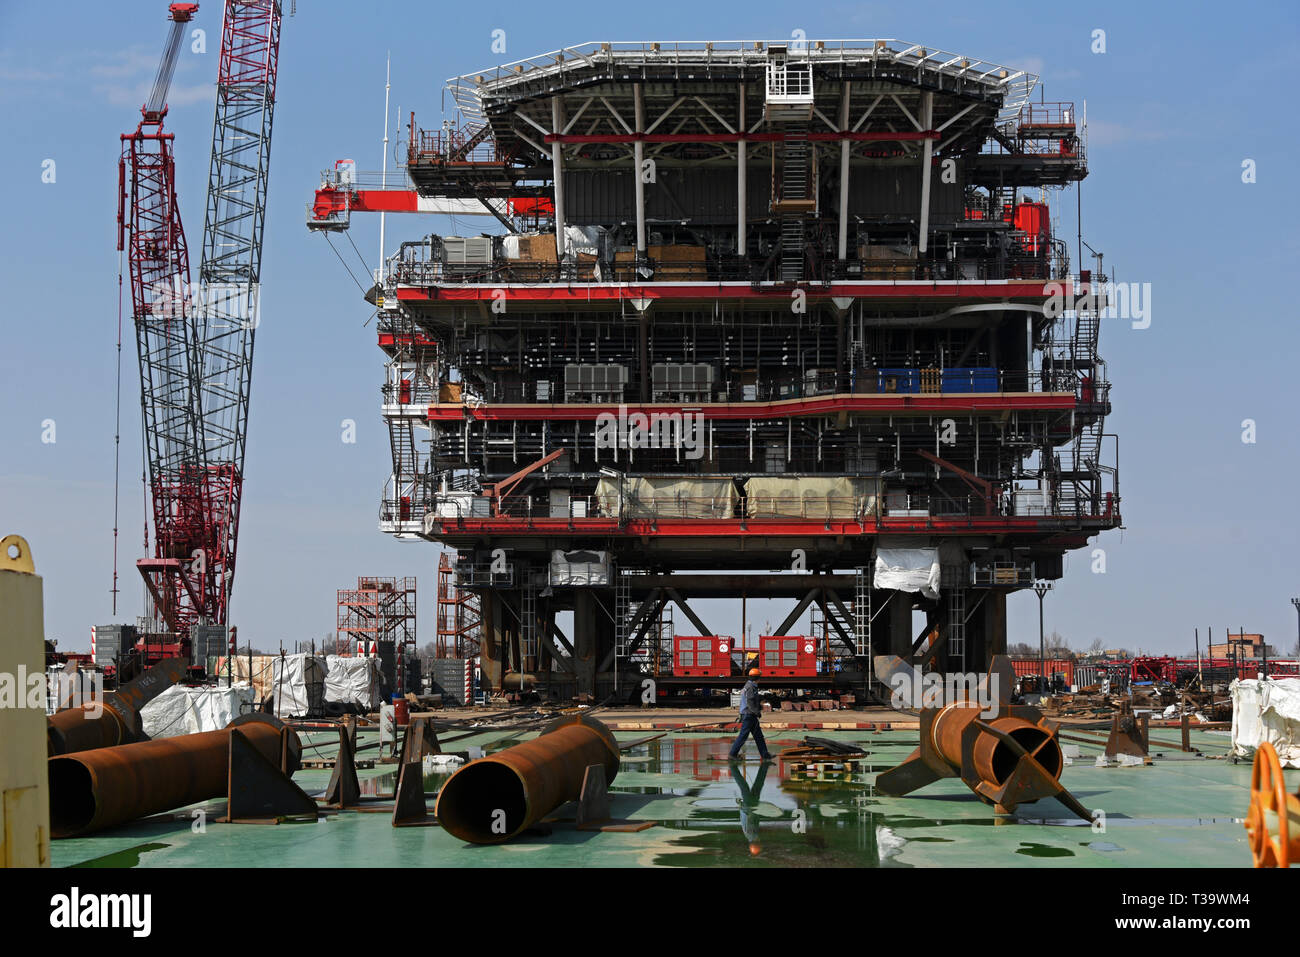 Construction and building of the wellhead of the oil rig platform for Lukoil Filanovsky field development project in the Caspian sea in Russia. Stock Photo